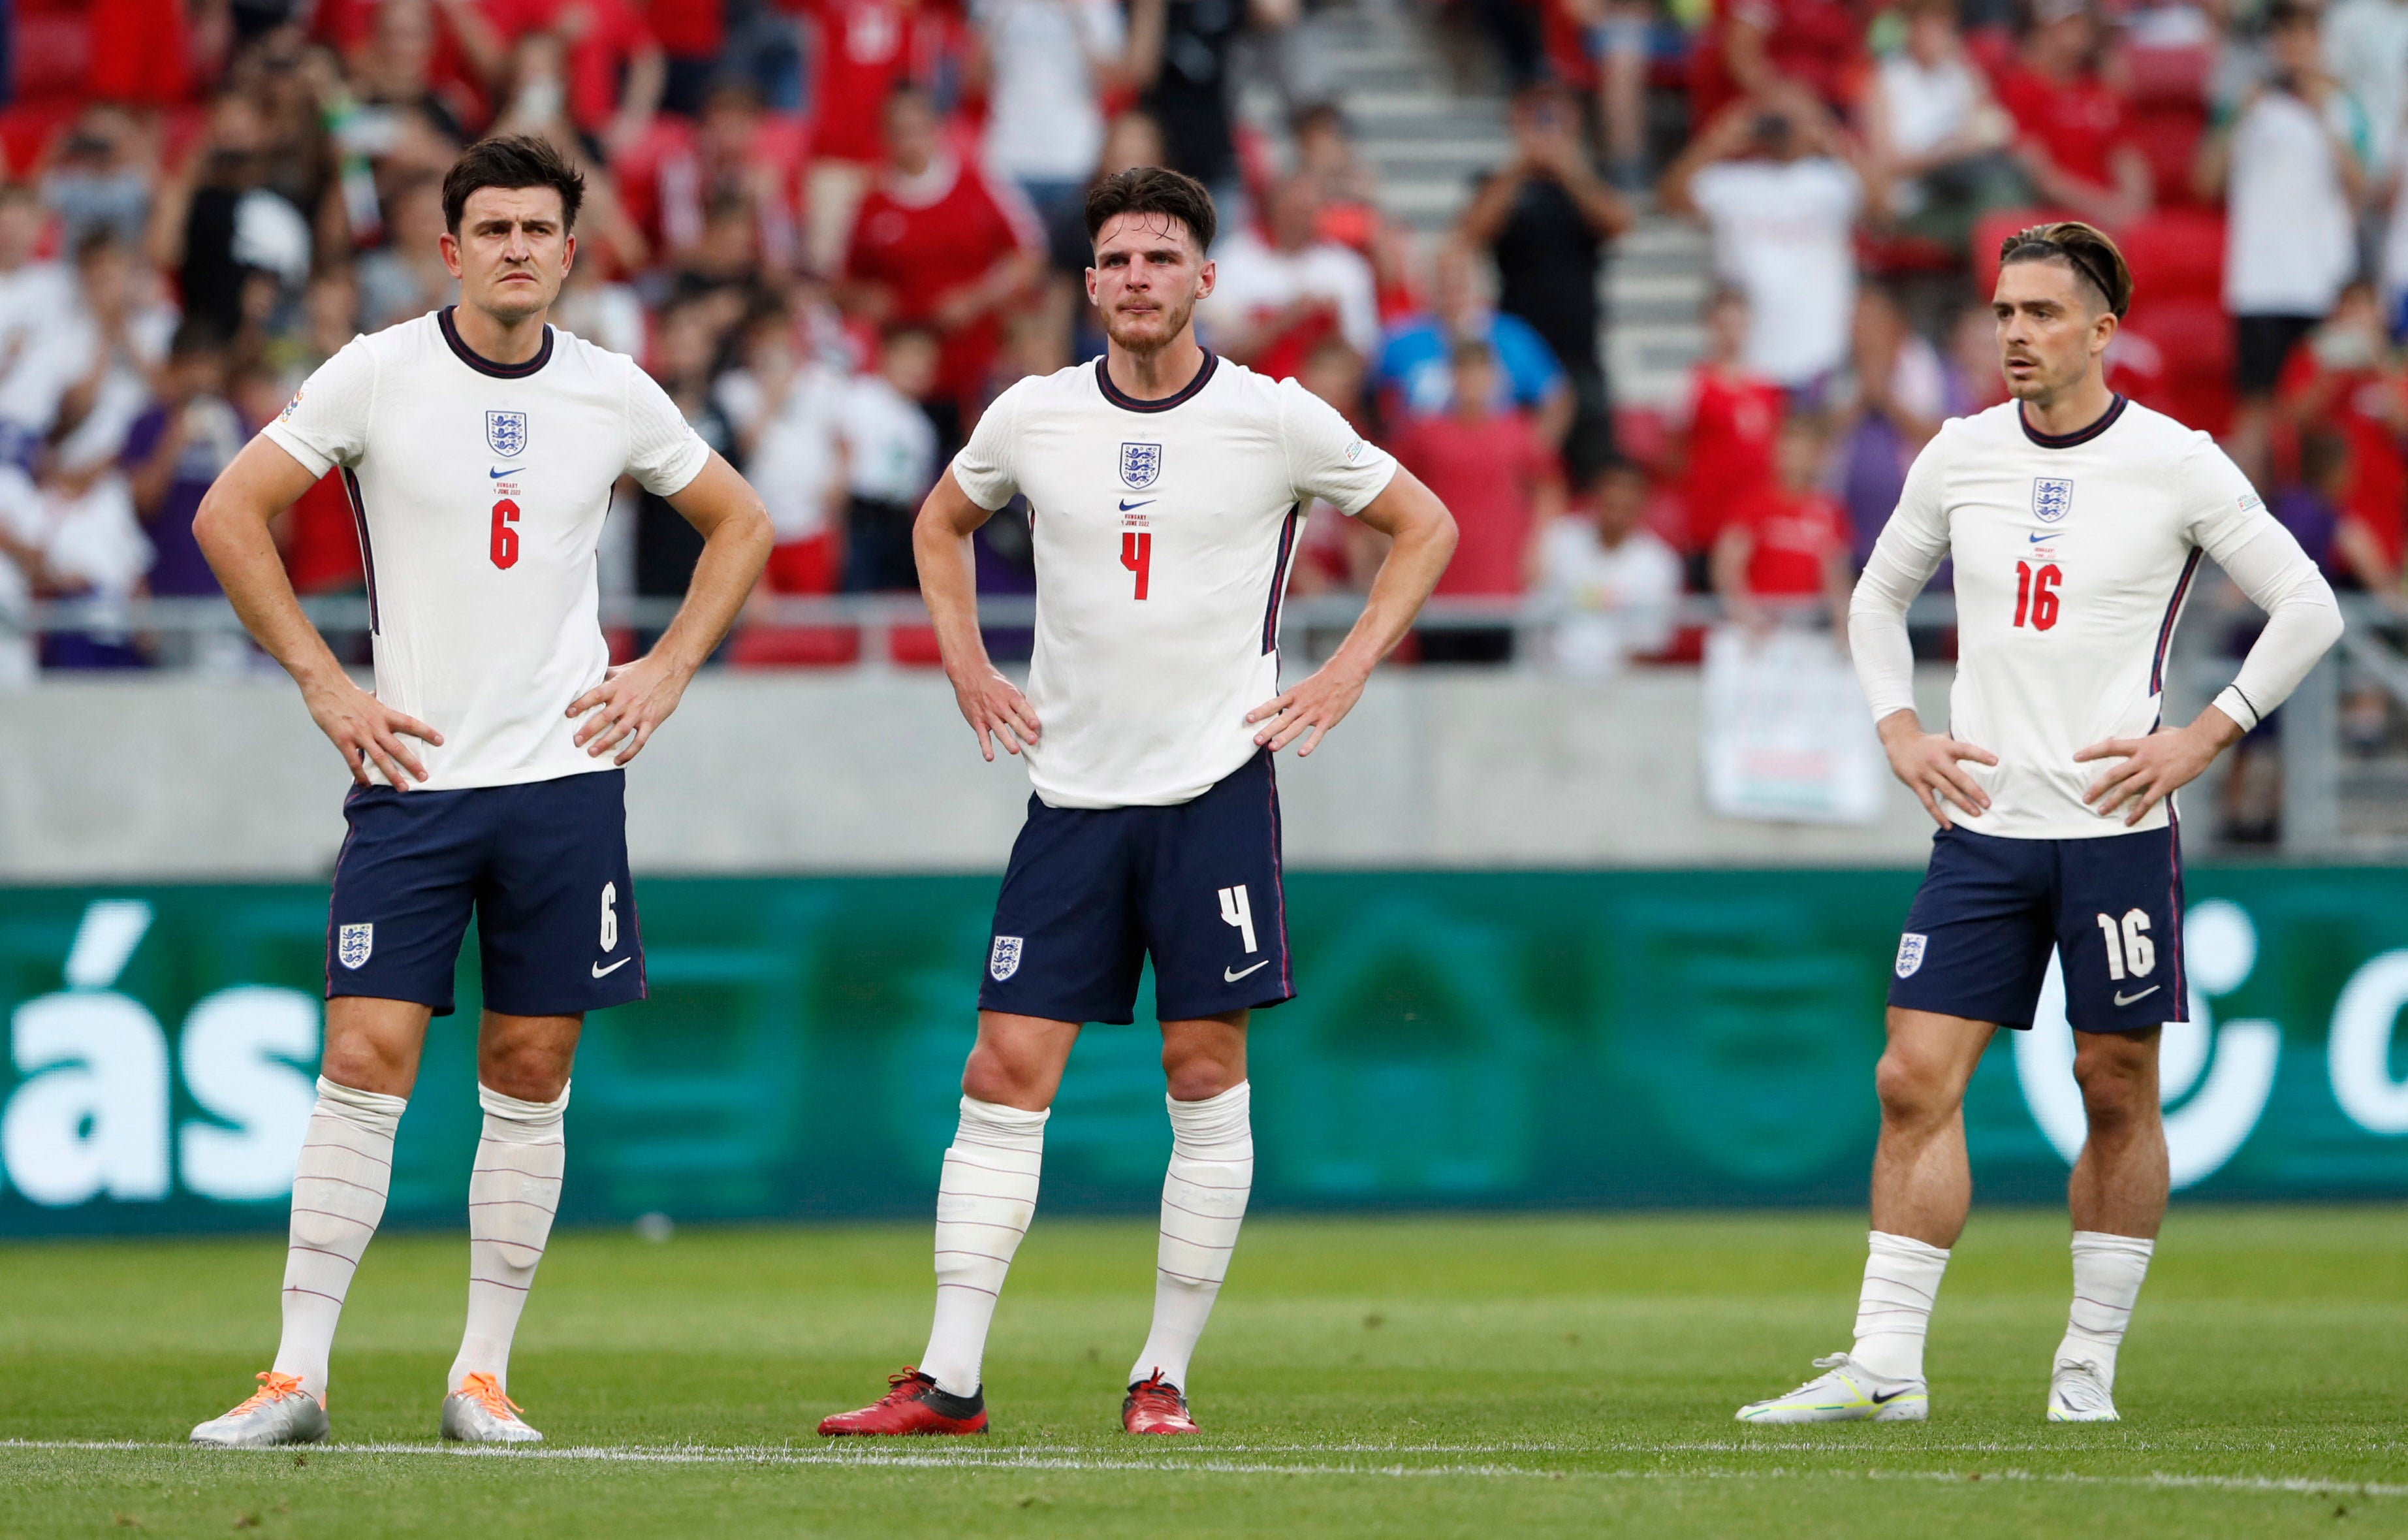 Harry Maguire, Declan Rice and Jack Grealish come to terms with England‘s first loss to Hungary in 60 years